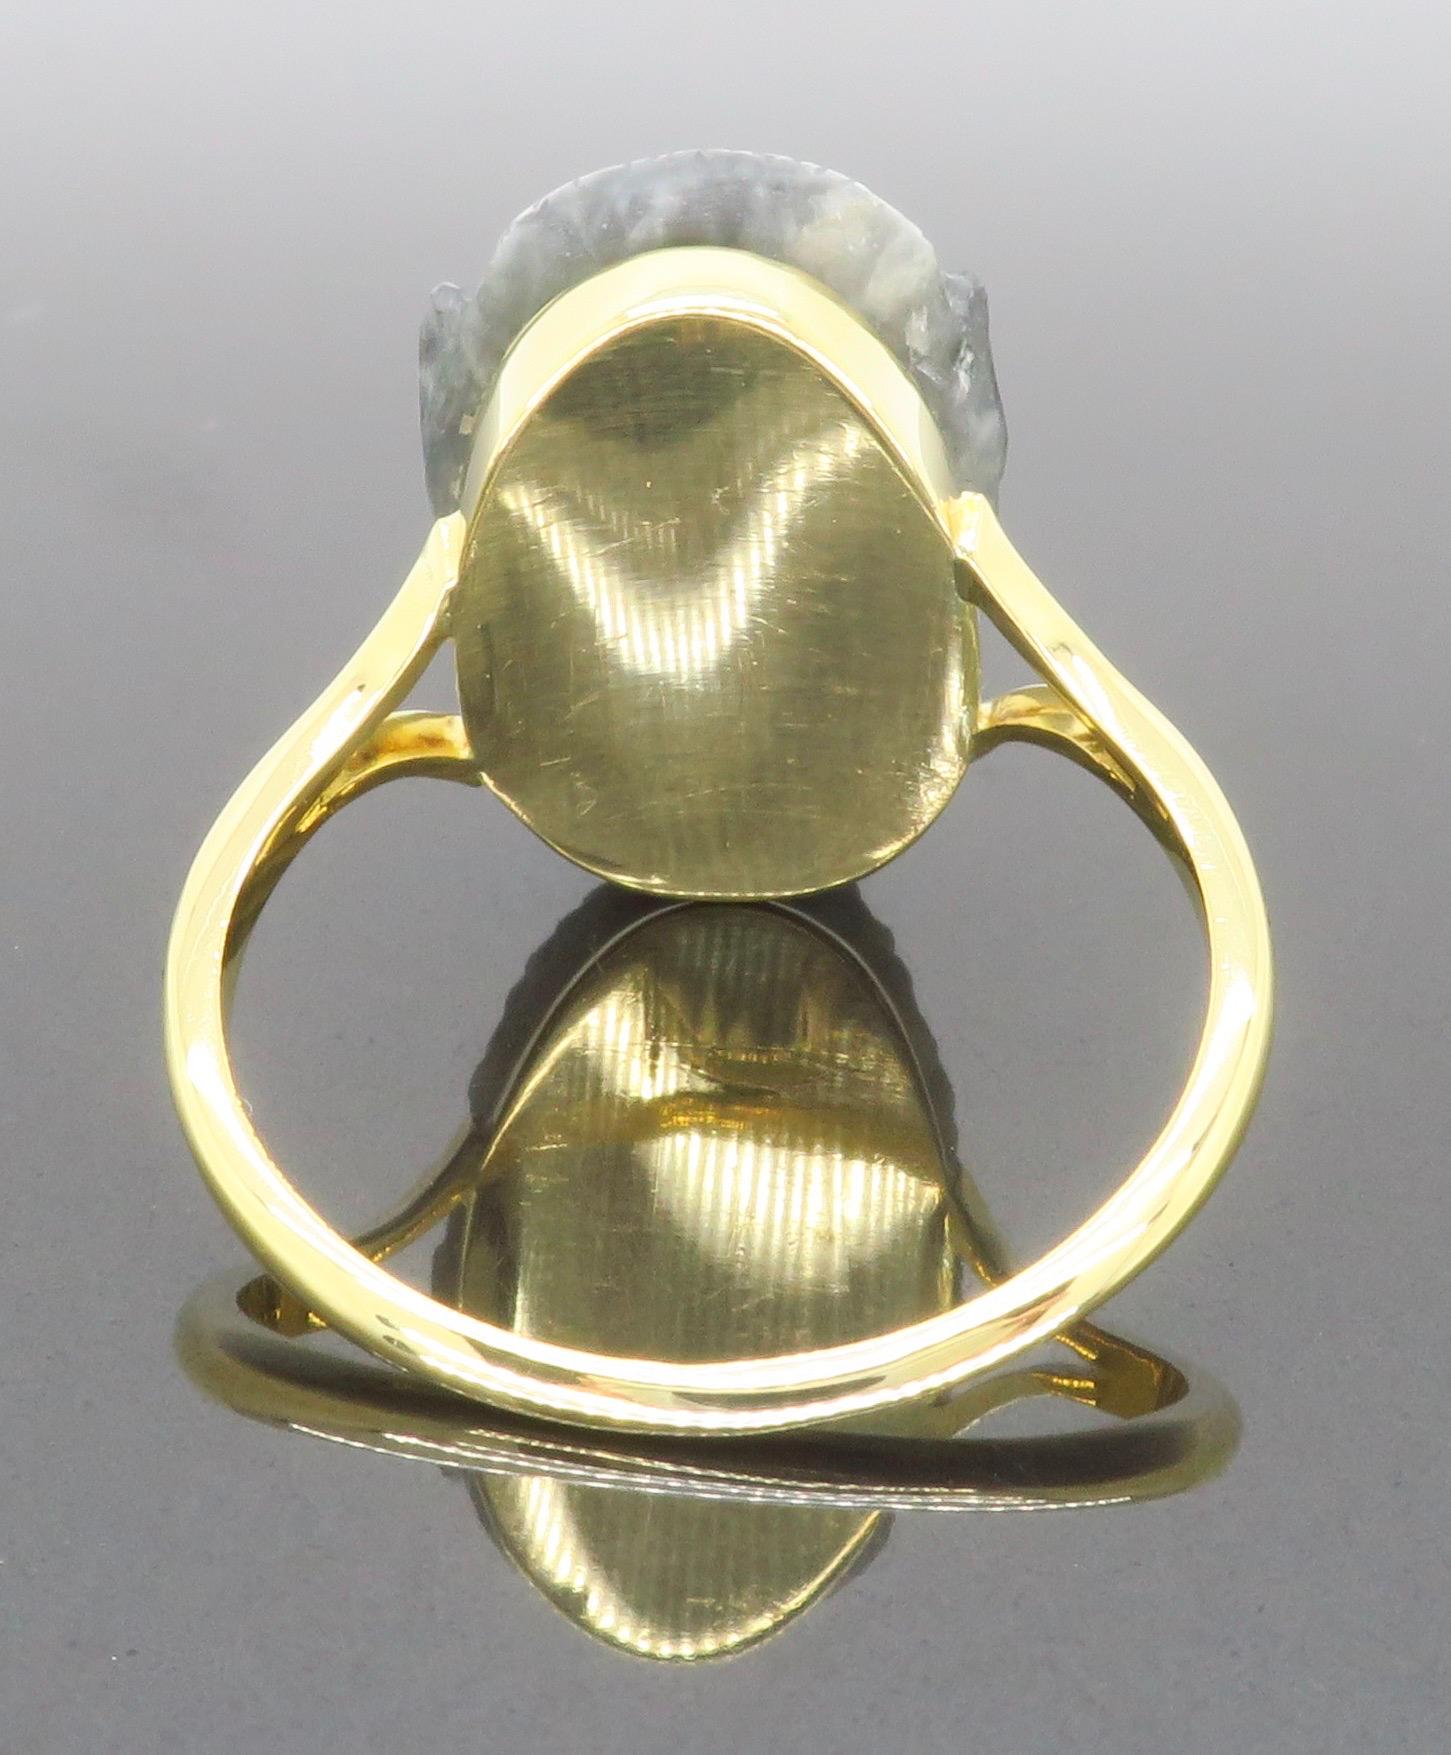 Round Cut 18k Yellow Gold Ring with Carved Labradorite Gorilla with Diamond Eyes